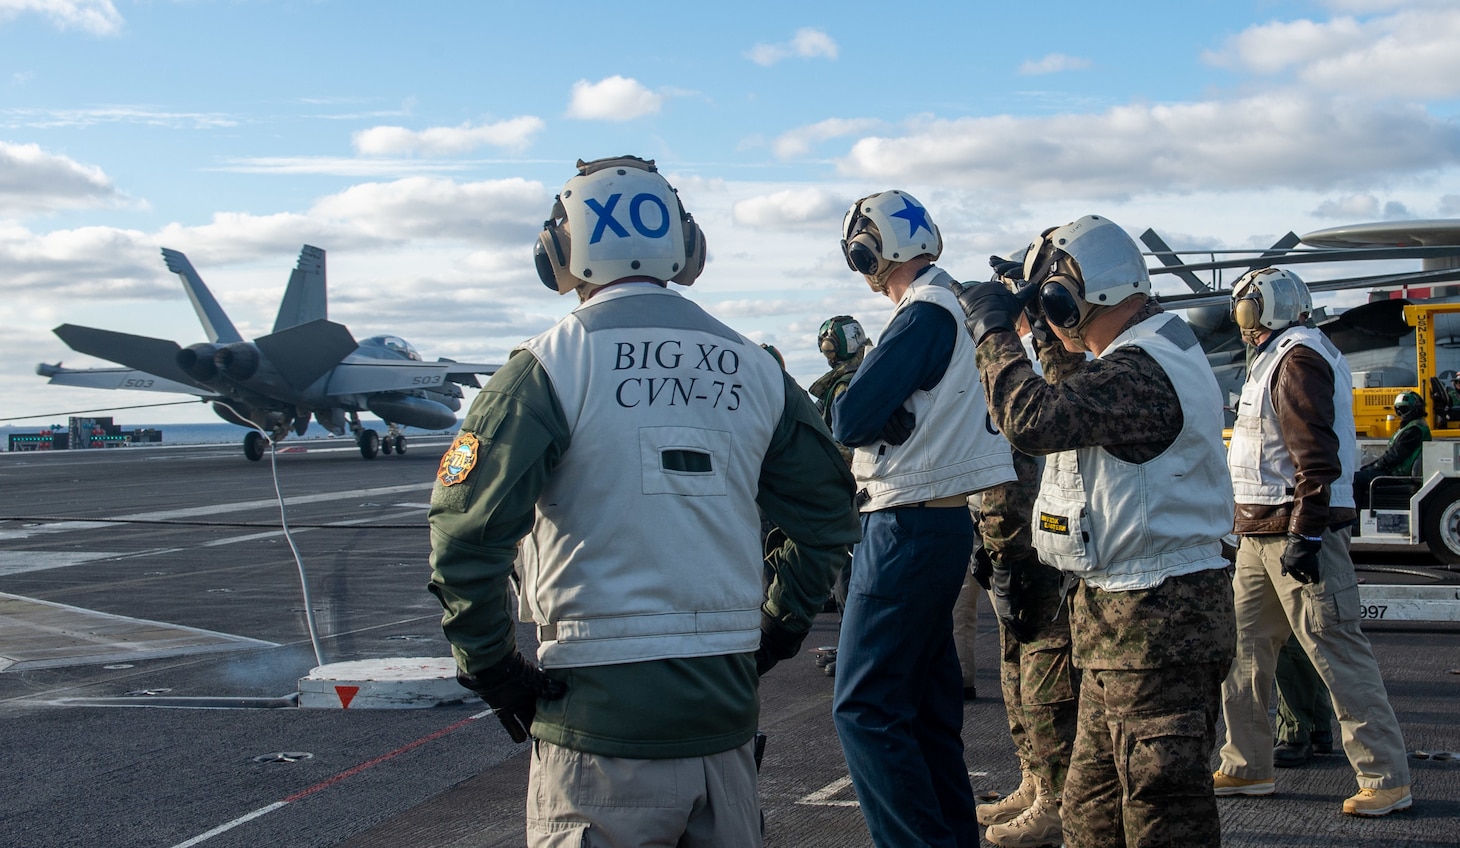 Tunisian service members, Rear Adm. Curt Renshaw, commander Carrier Strike Group Eight, and Capt. Shane Marchesi, executive officer of the Nimitz-class aircraft carrier USS Harry S. Truman (CVN 75), observe flight operations on Truman's flight deck during a distinguished visitor visit, Dec. 20, 2021.